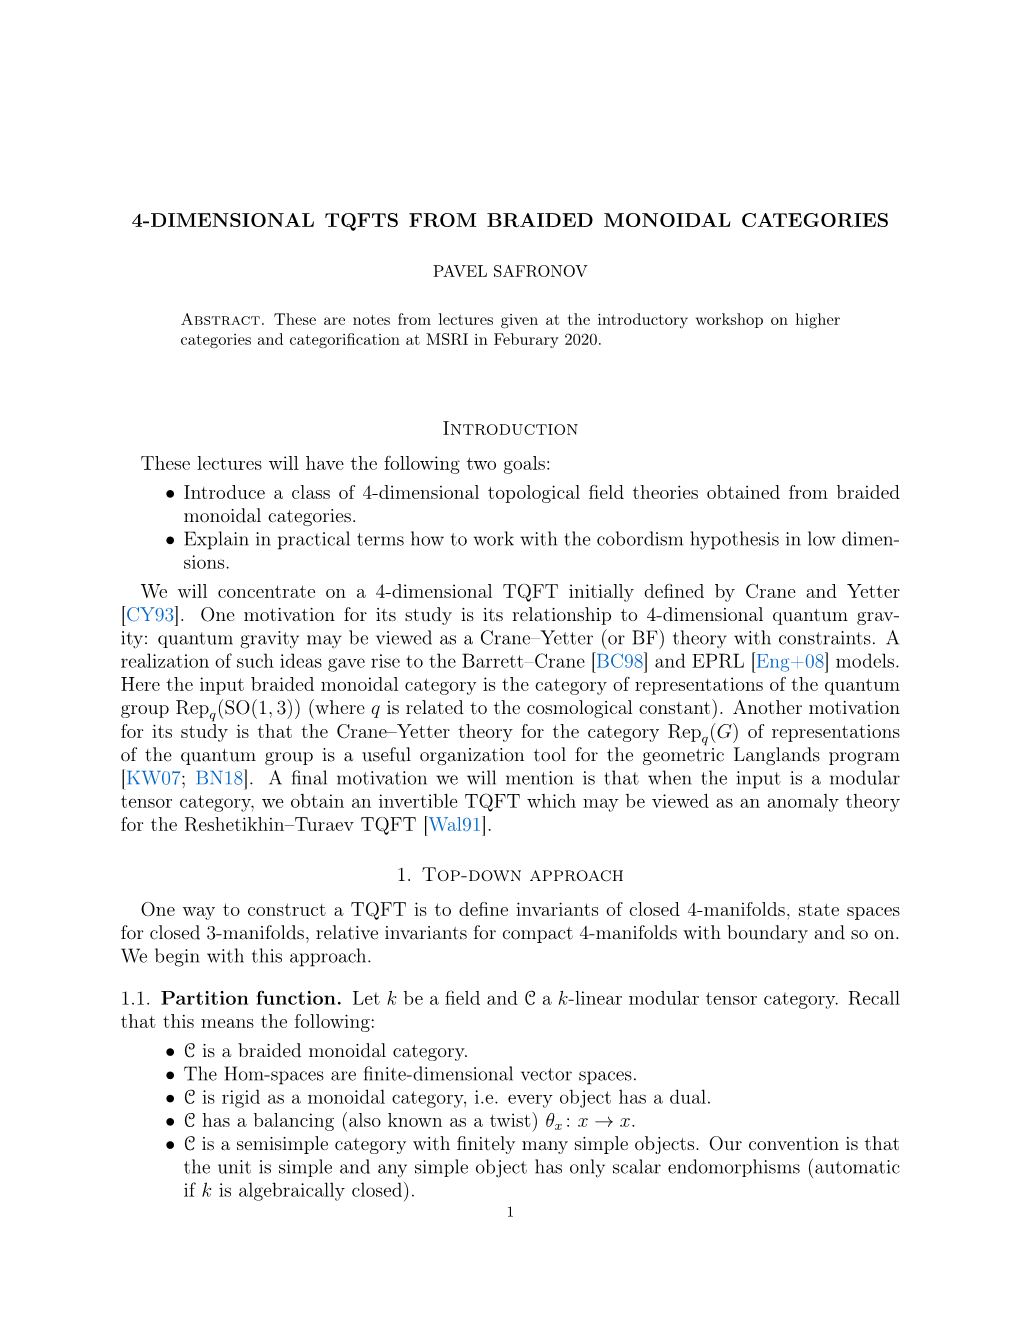 4-Dimensional Tqfts from Braided Monoidal Categories